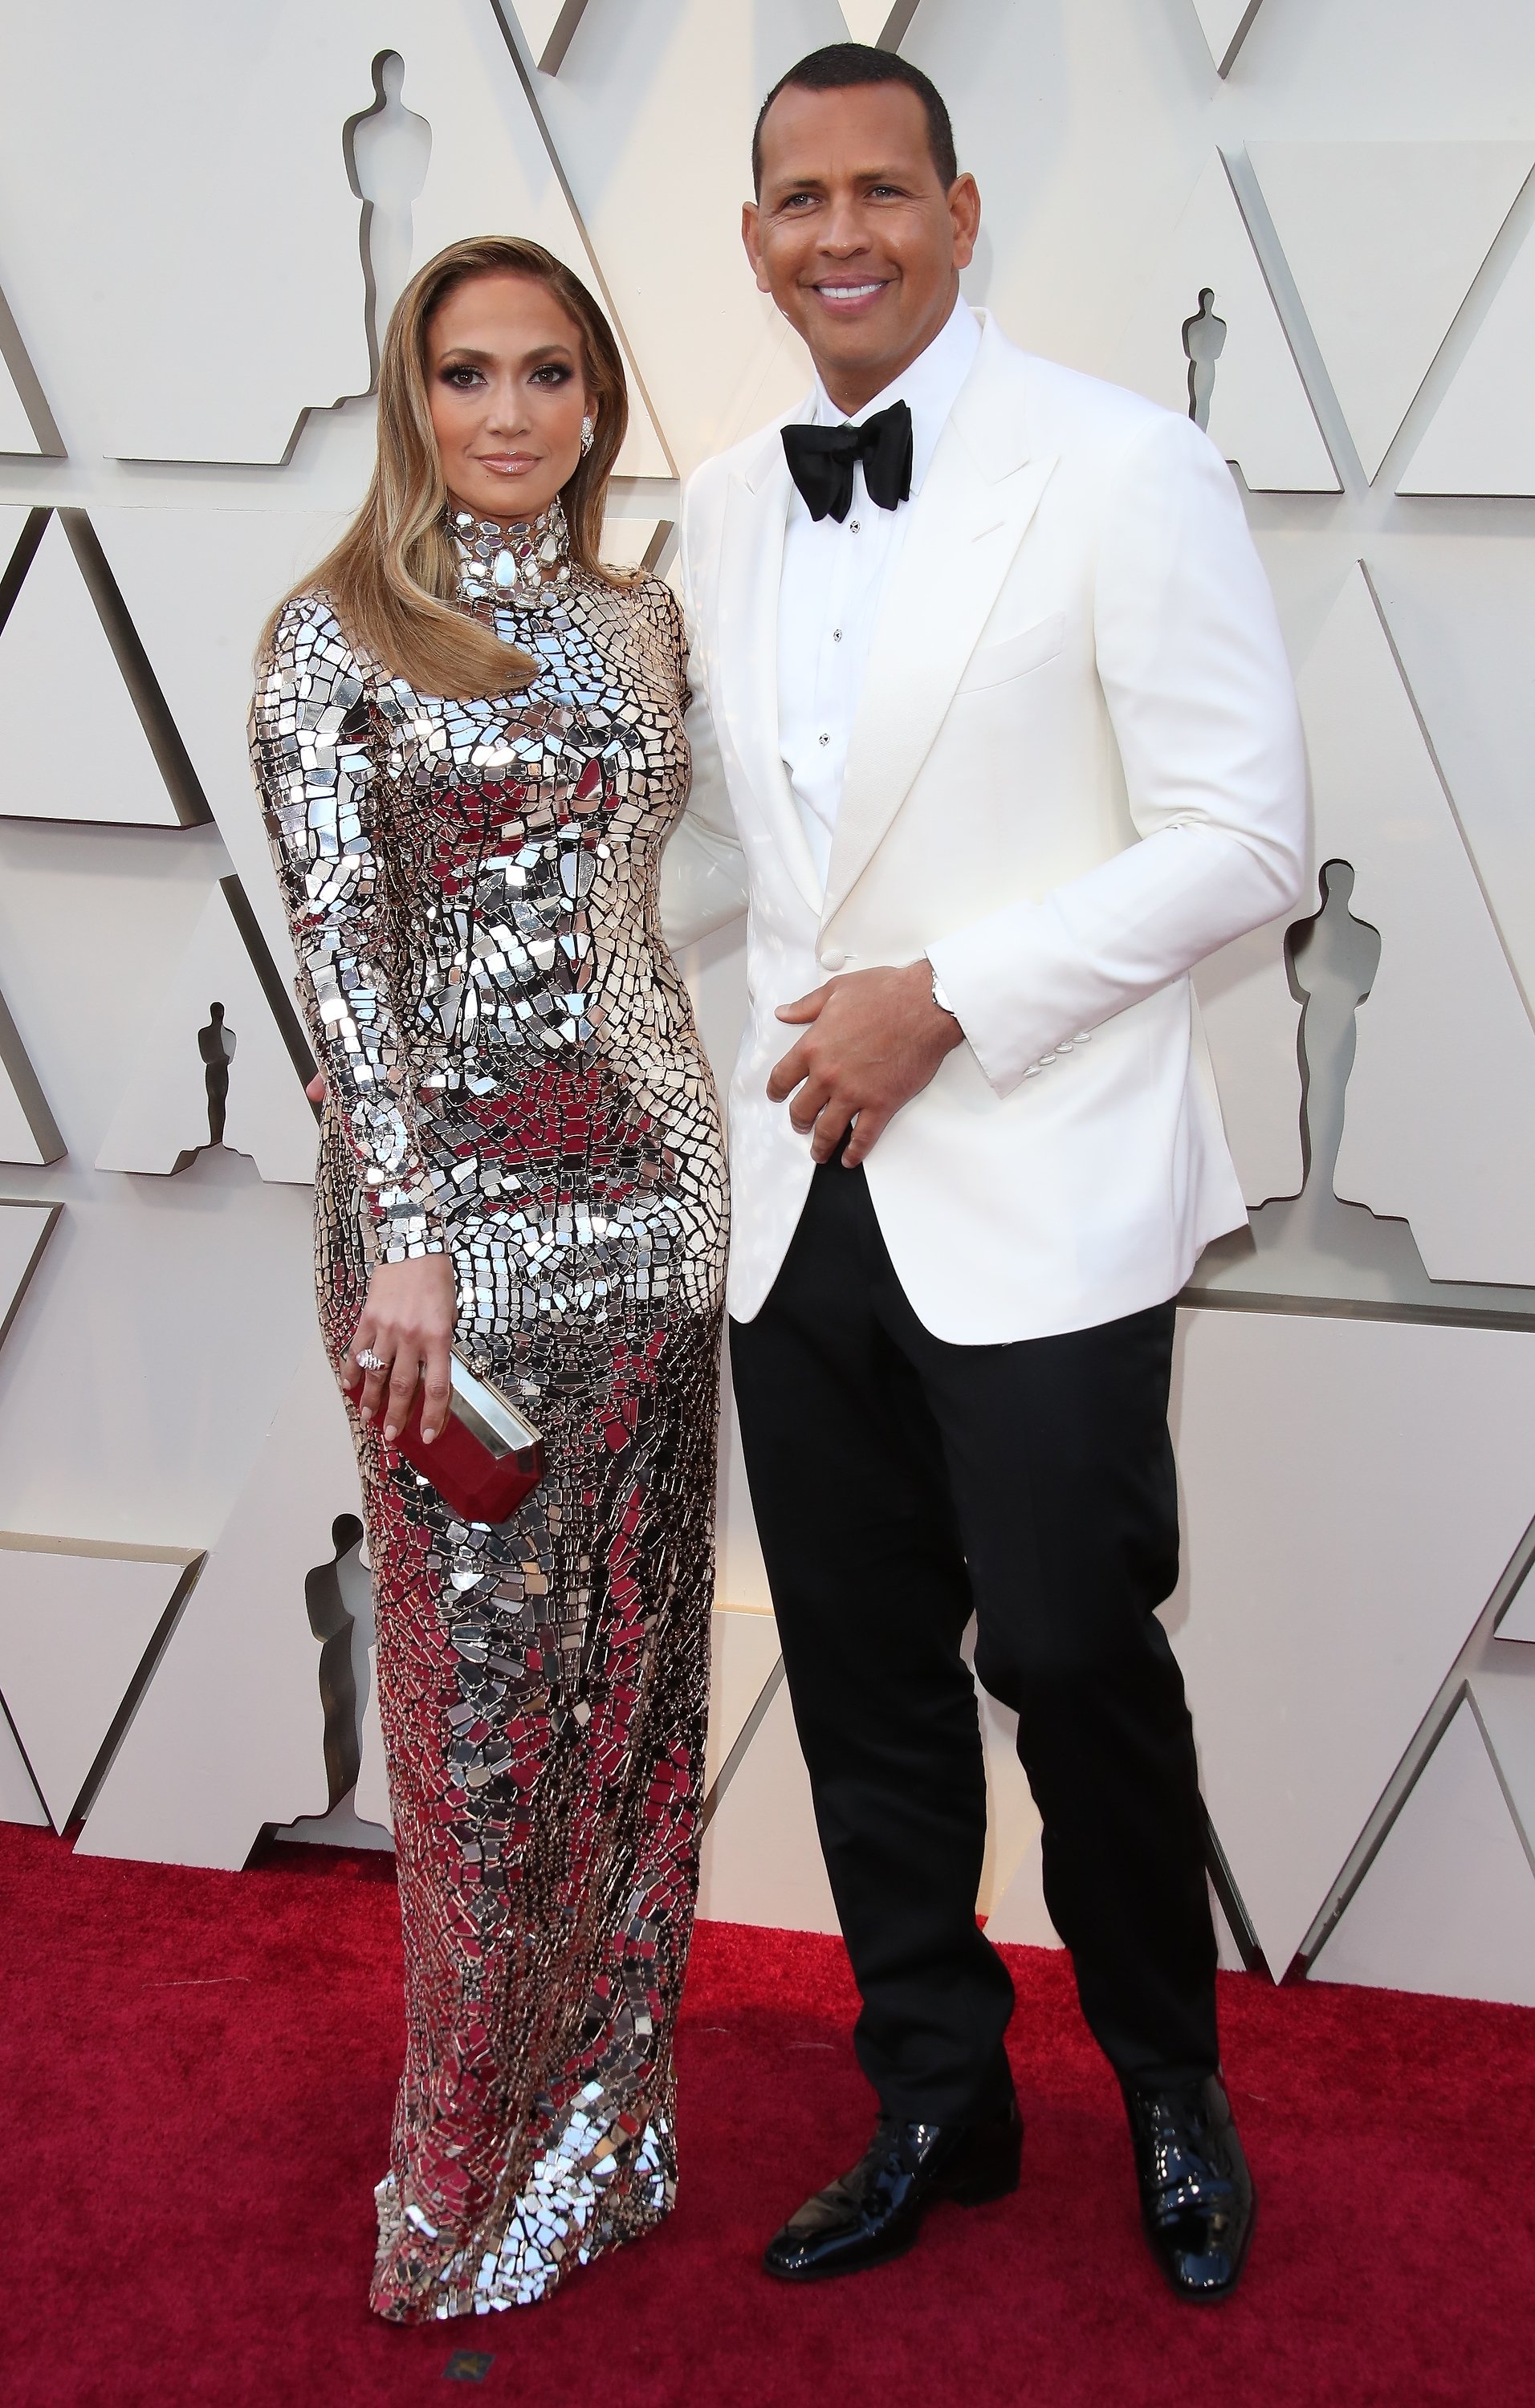 Alex Rodriguez and Jennifer Lopez attend the 91st Annual Academy Awards at Hollywood and Highland on February 24, 2019, in Hollywood, California. | Source: Getty Images.